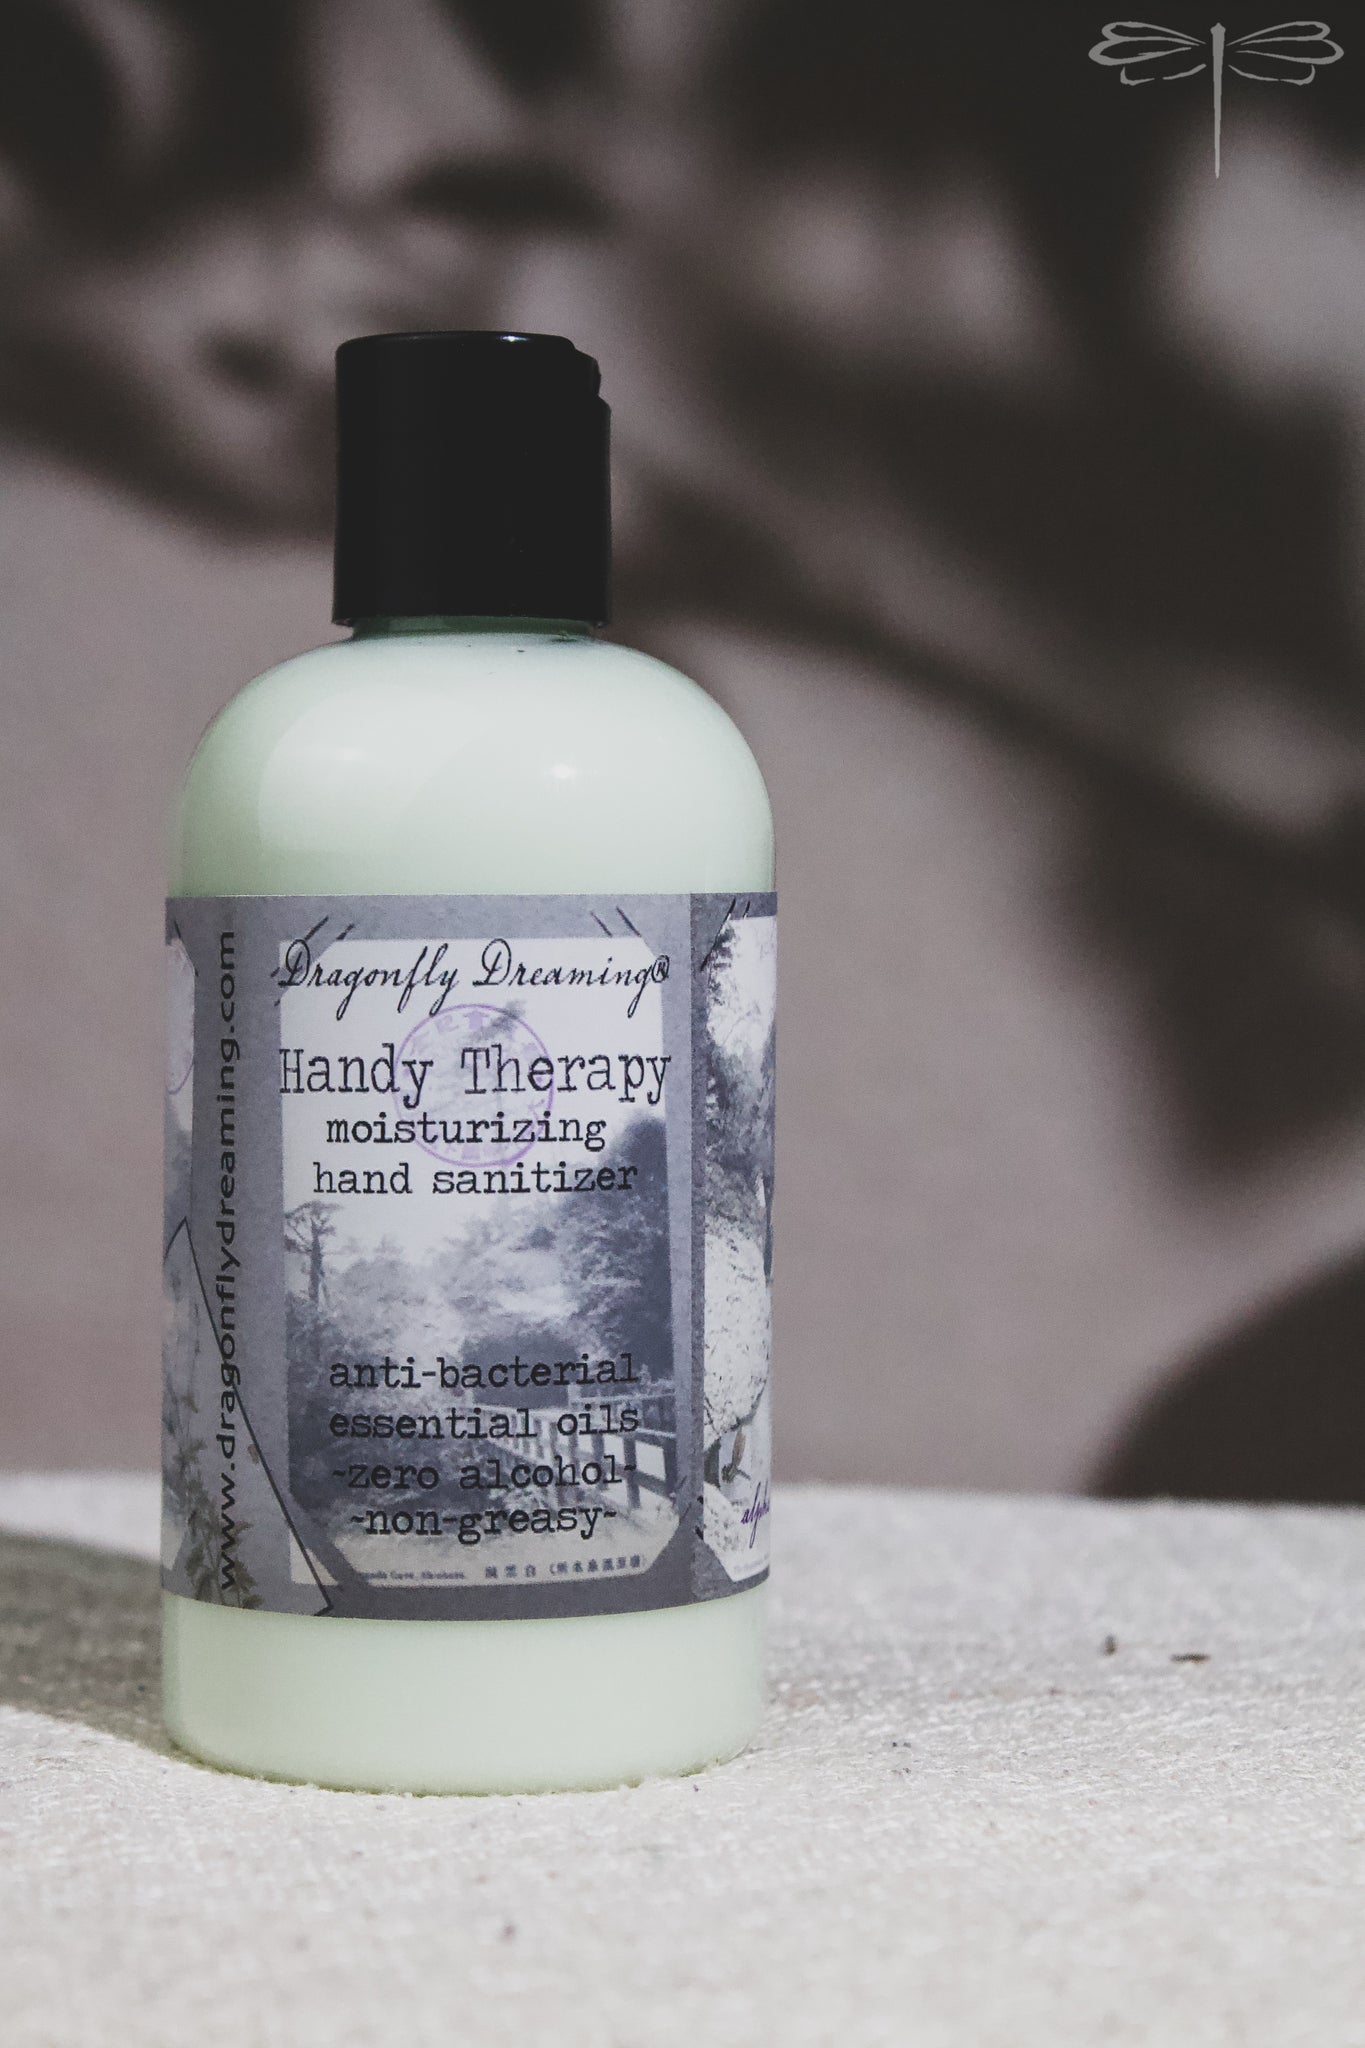 Handy Therapy Moisturizing Hand Sanitizer by Dragonfly Dreaming Organics